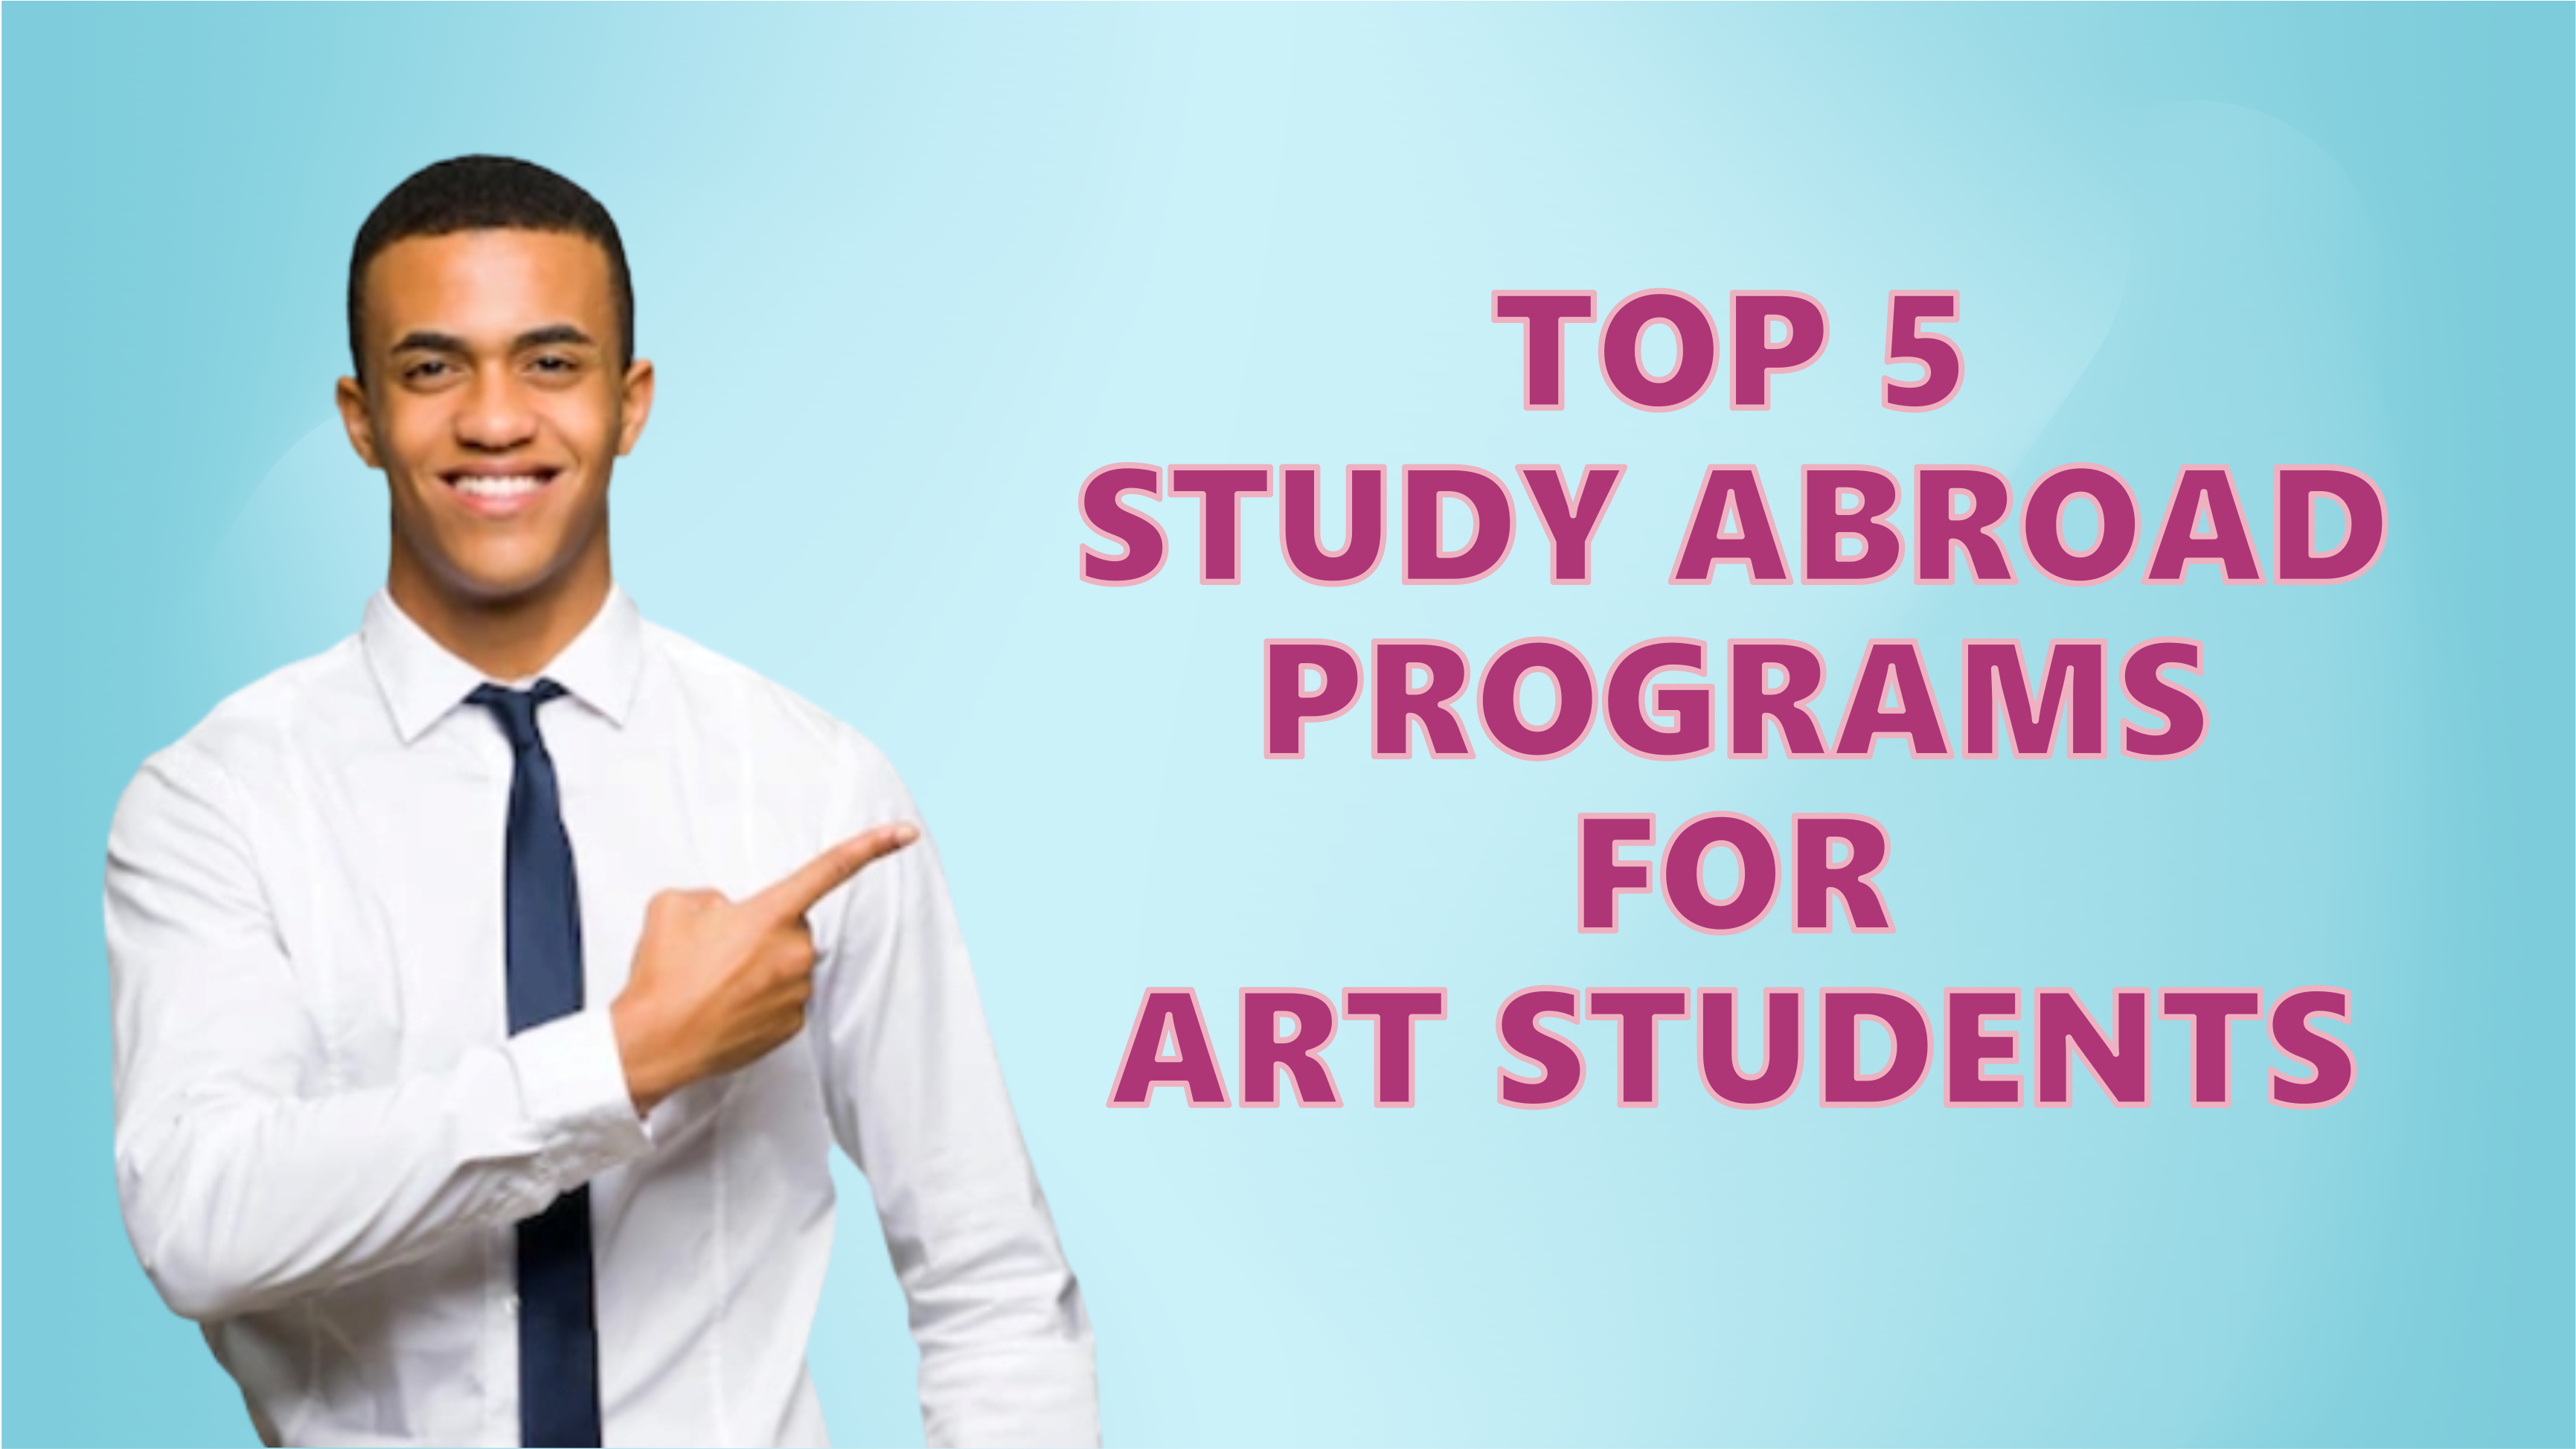 Top 5 study abroad programs for art students